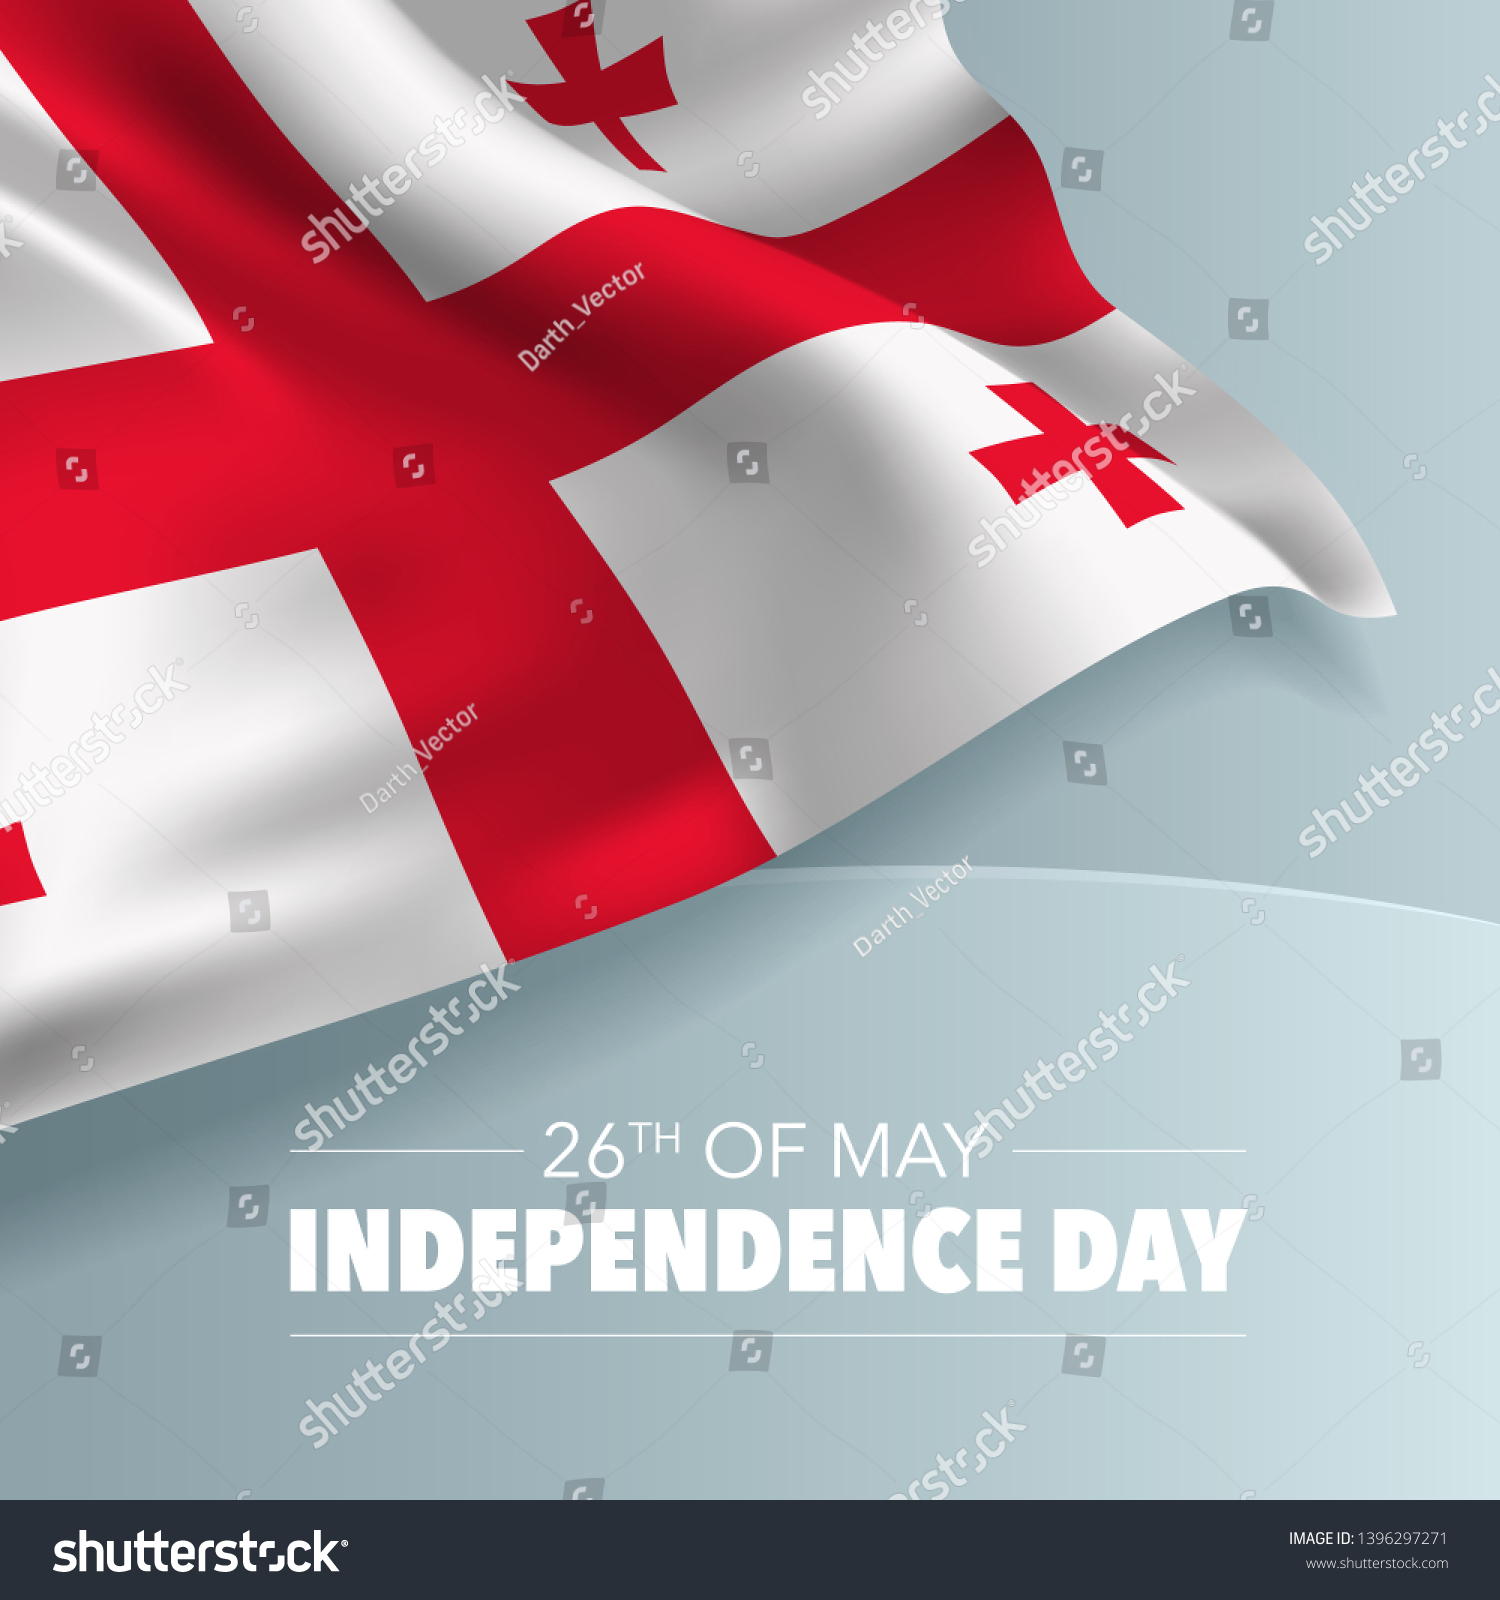 SVG of Georgia happy independence day greeting card, banner, vector illustration. Georgian national day 26th of May background with elements of flag, square format  svg